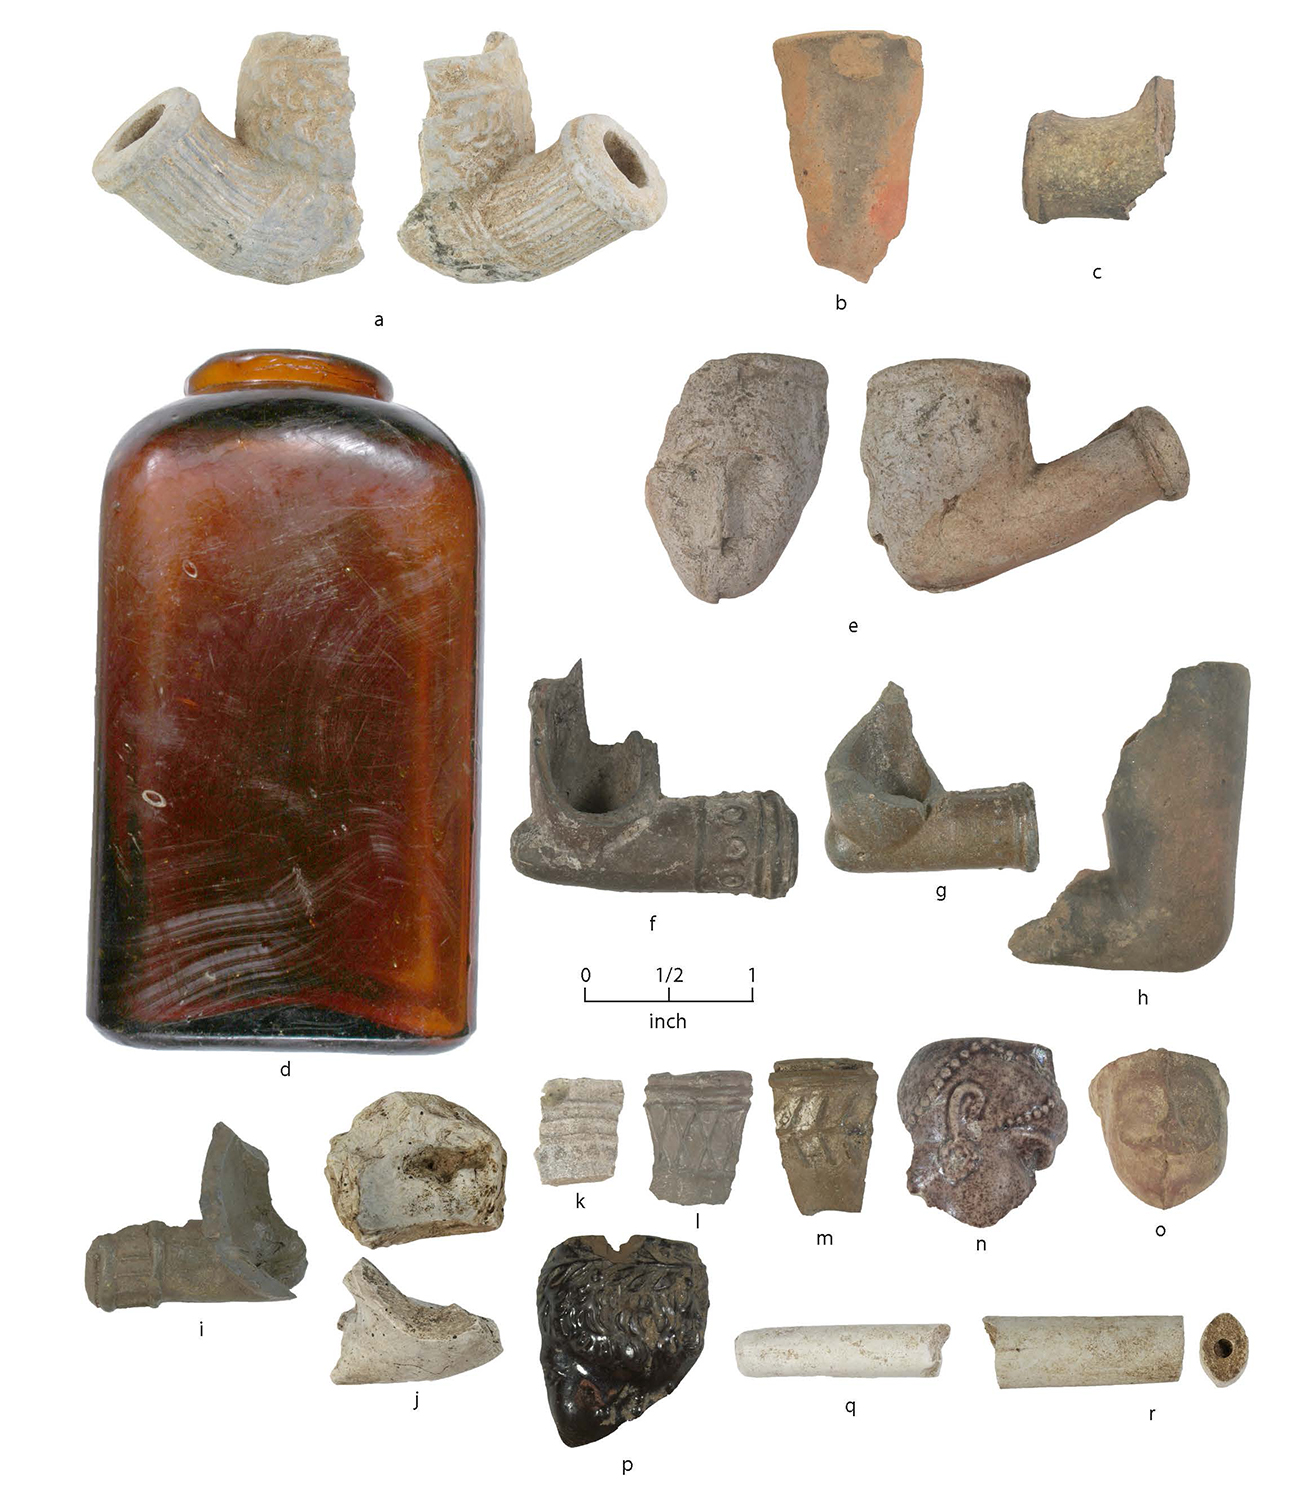 fragments of clay pipes and glass vessel fragments on a white background with a scale bar.